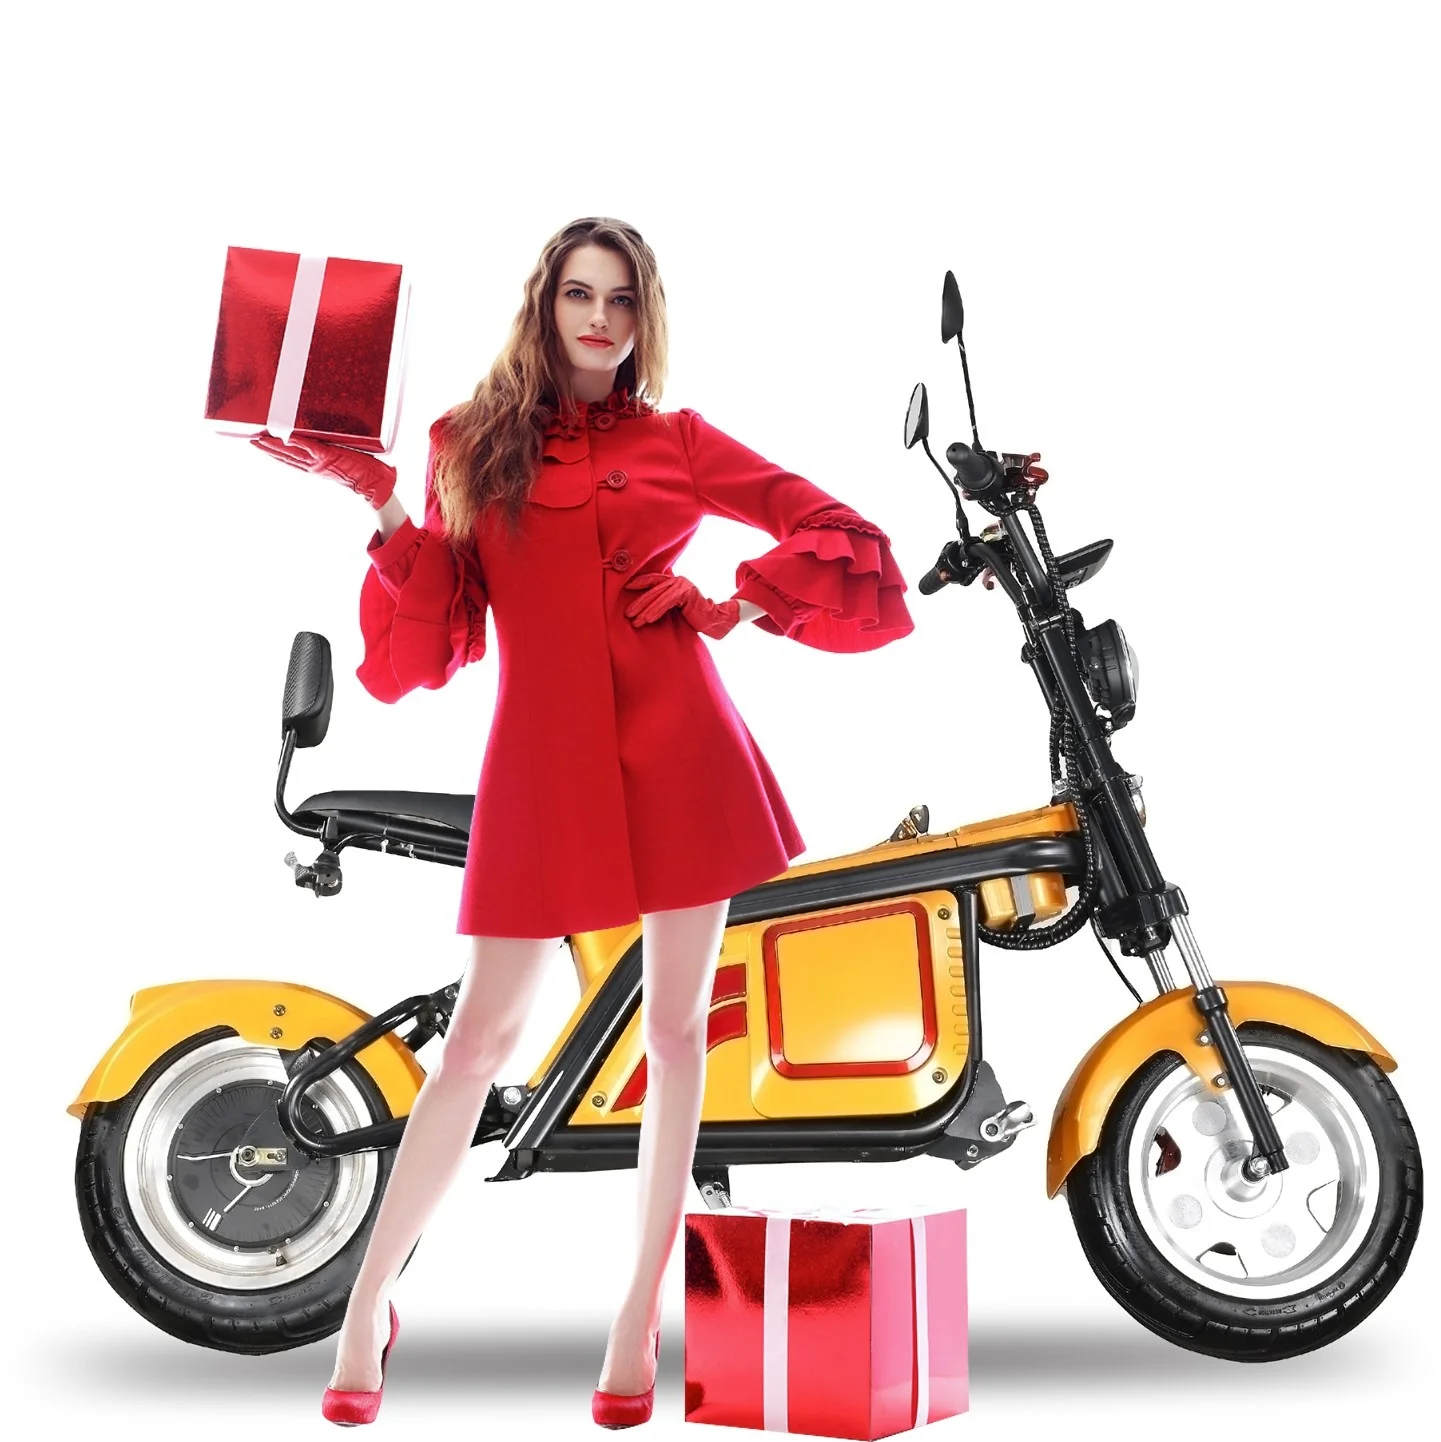 

2023 Holland Warehouse European Warehouse Stock 1500w Electric Scooter City Coco Seev Citycoco Fat Tire Adult Scooter Electric